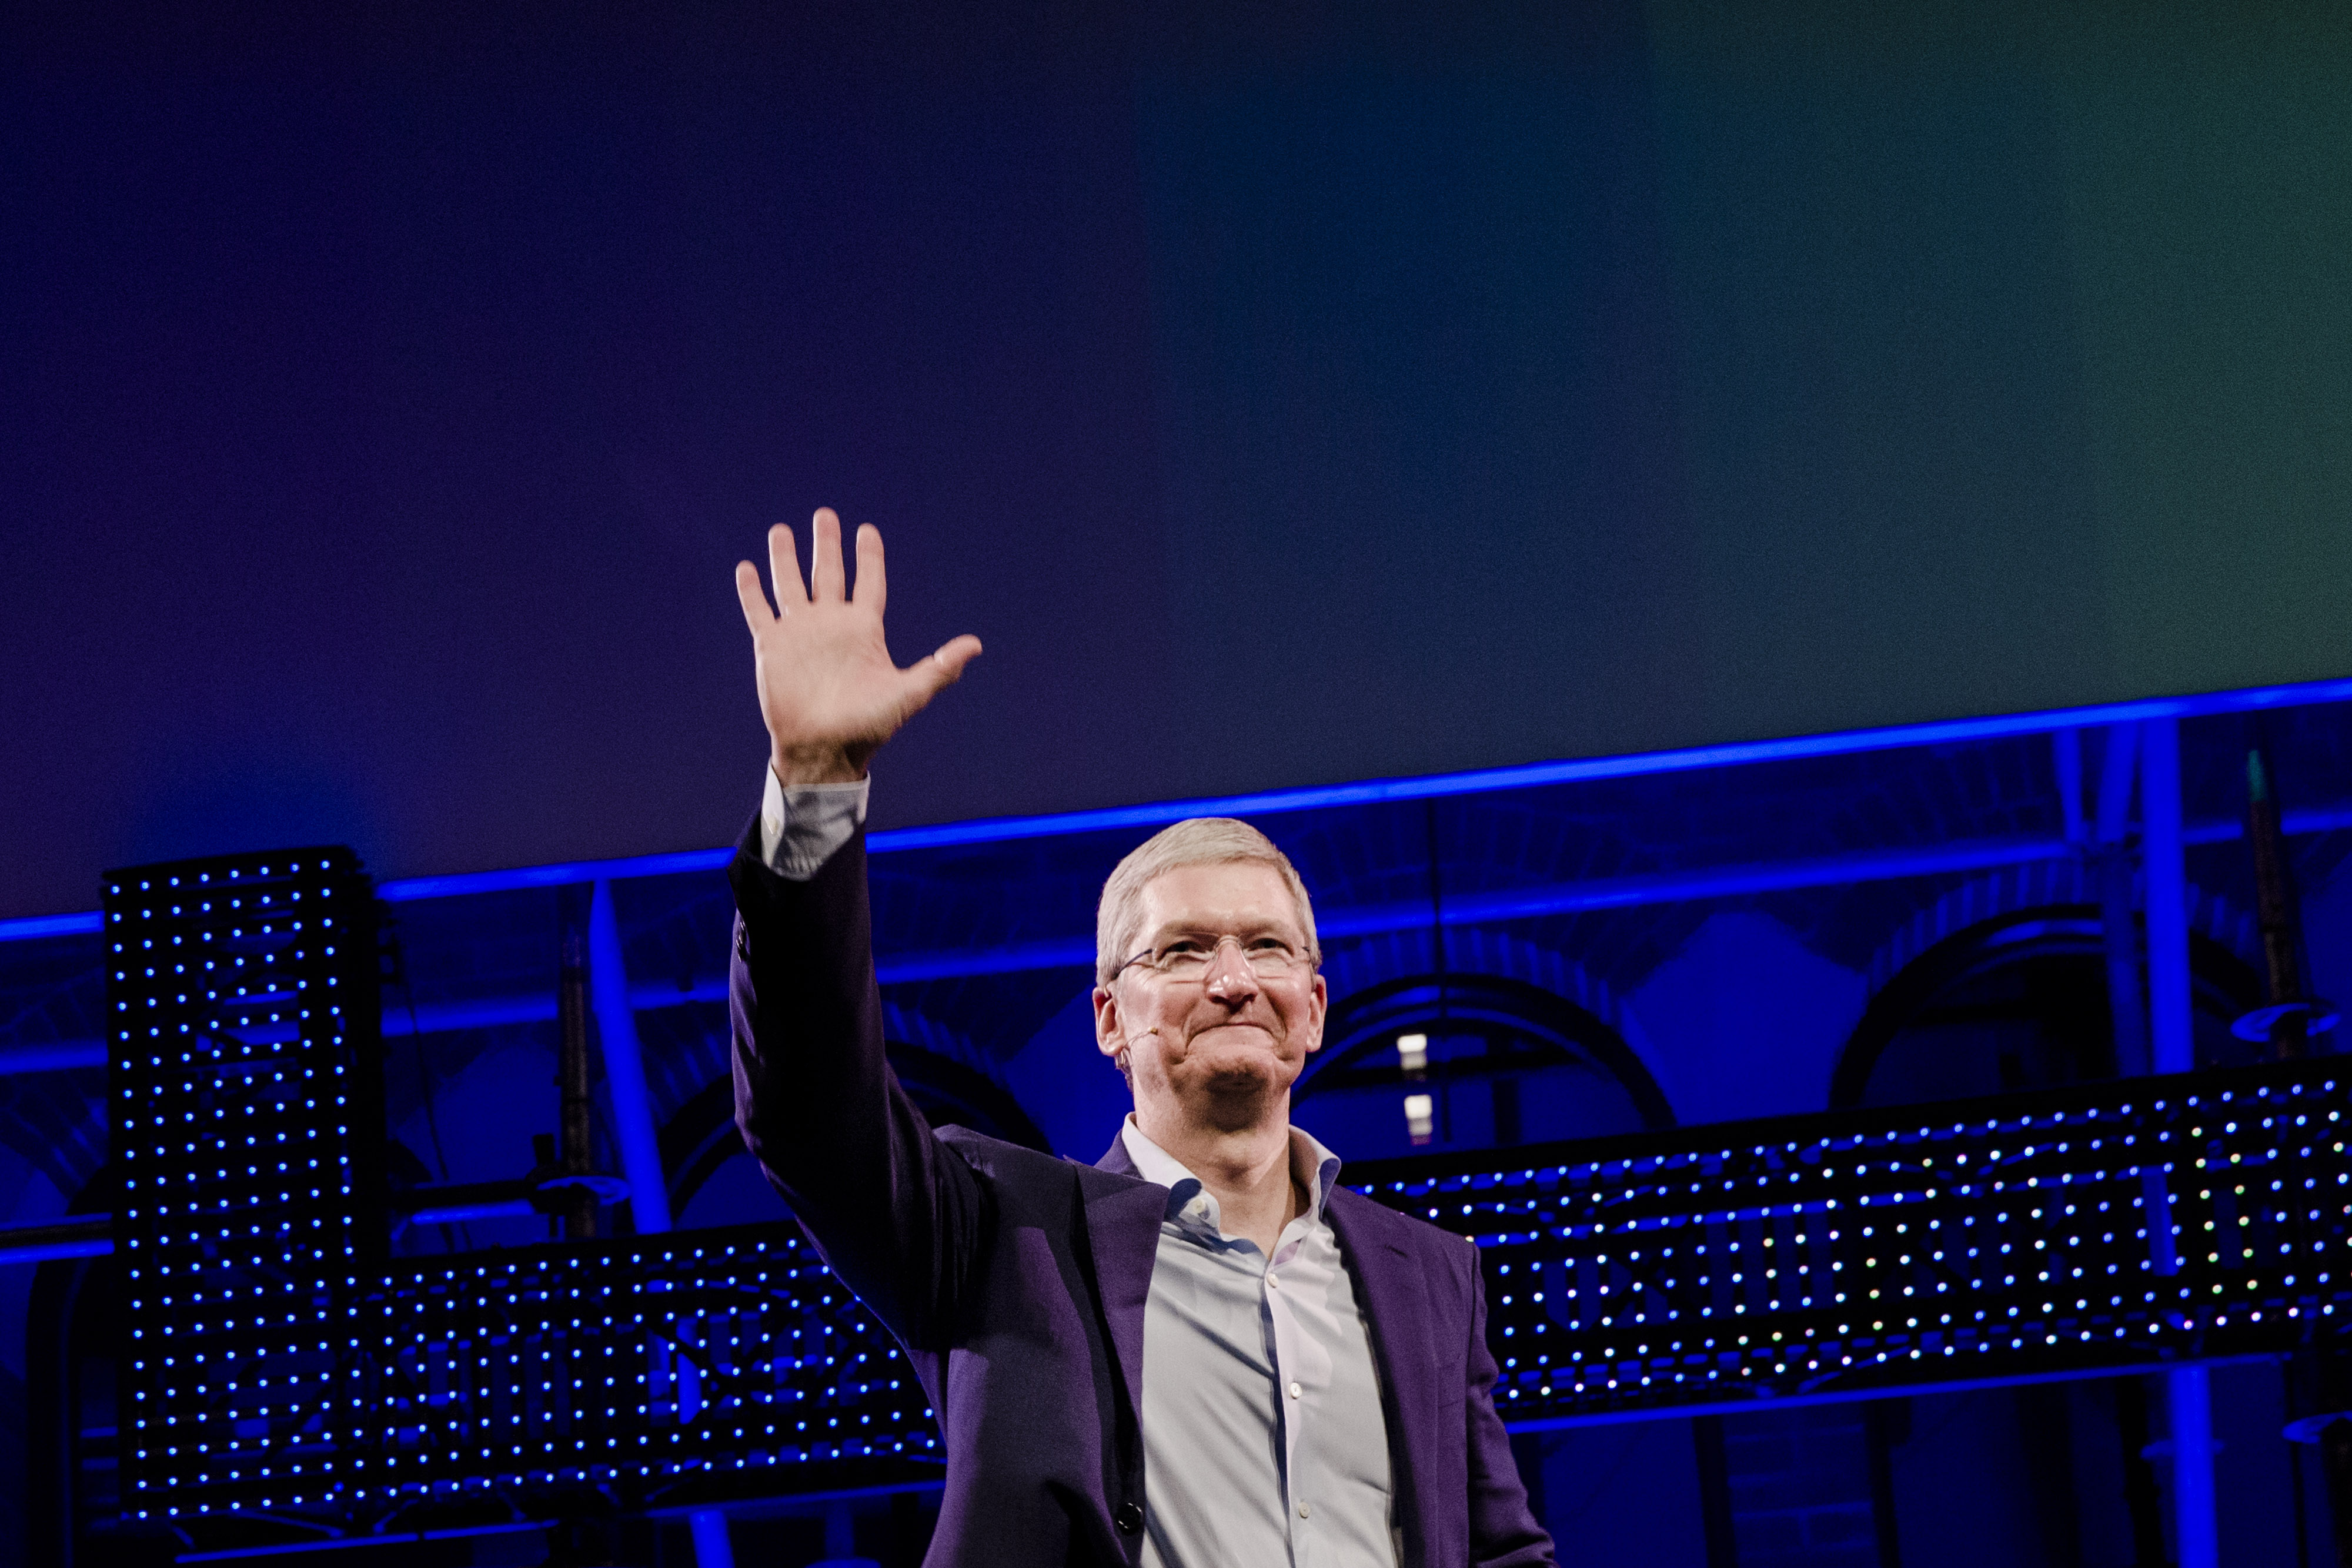 Tim Cook, chief executive officer of Apple Inc., waves to the audience during the opening of 